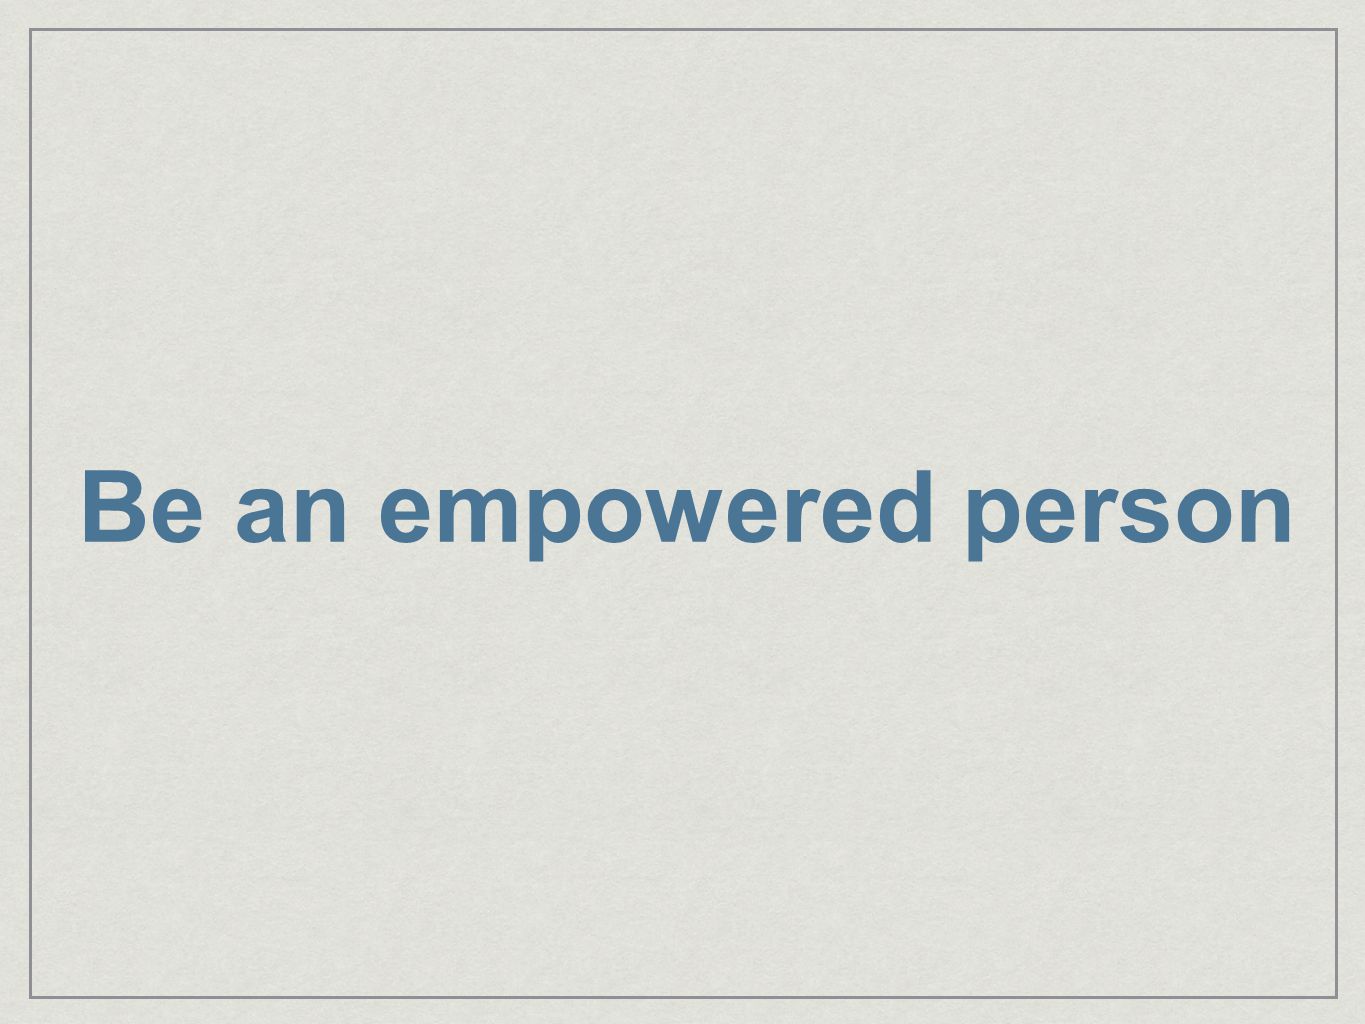 Be an empowered person